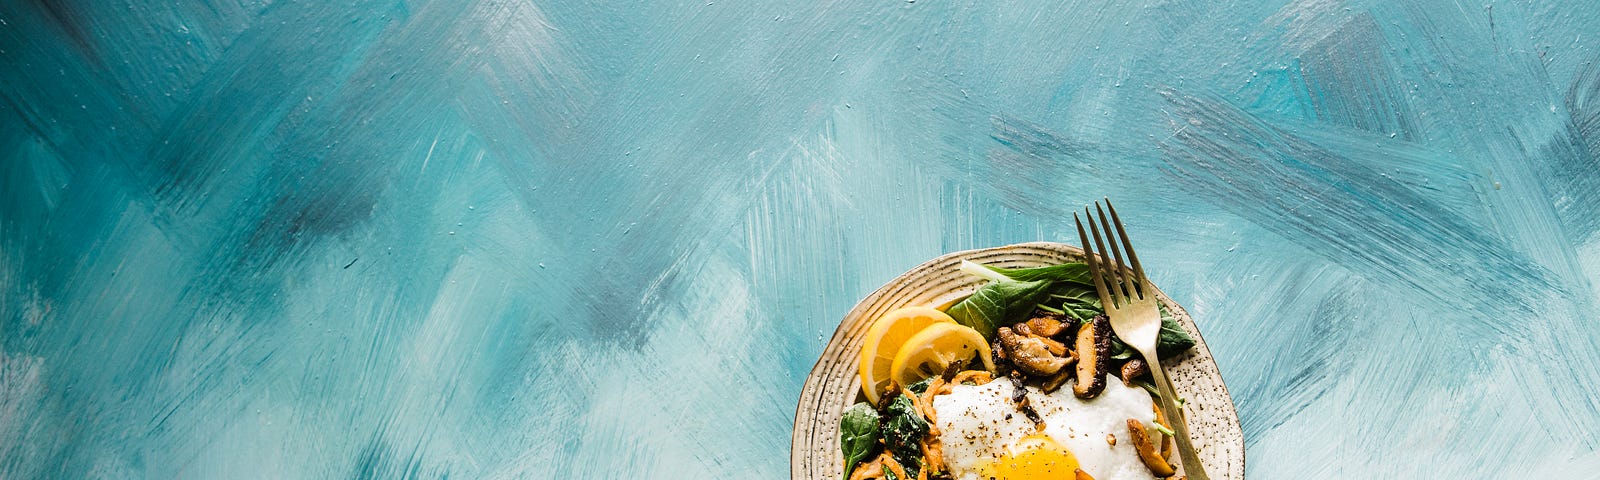 A plate of healthy noodles and vegetables is in the lower right corner of the image. A roughly painted background of broad blue and white streaks. Mindful eating is an ancient practice garnering considerable attention due to its potential to transform our relationship with food.